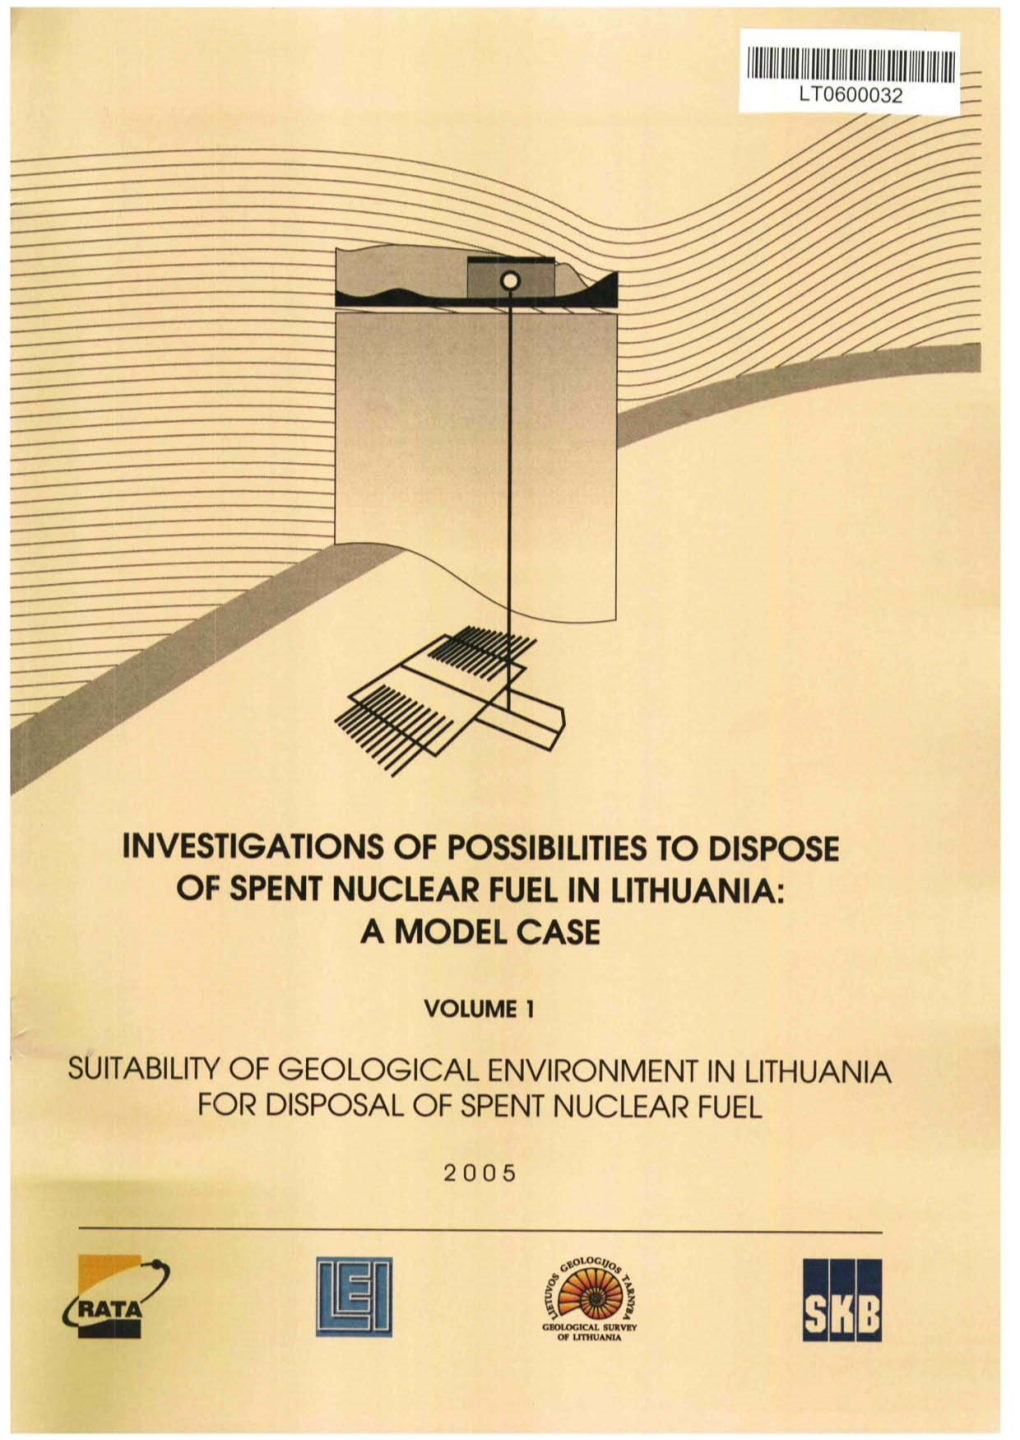 Investigations of Possibilities to Dispose of Spent Nuclear Fuel in Lithuania: a Model Case